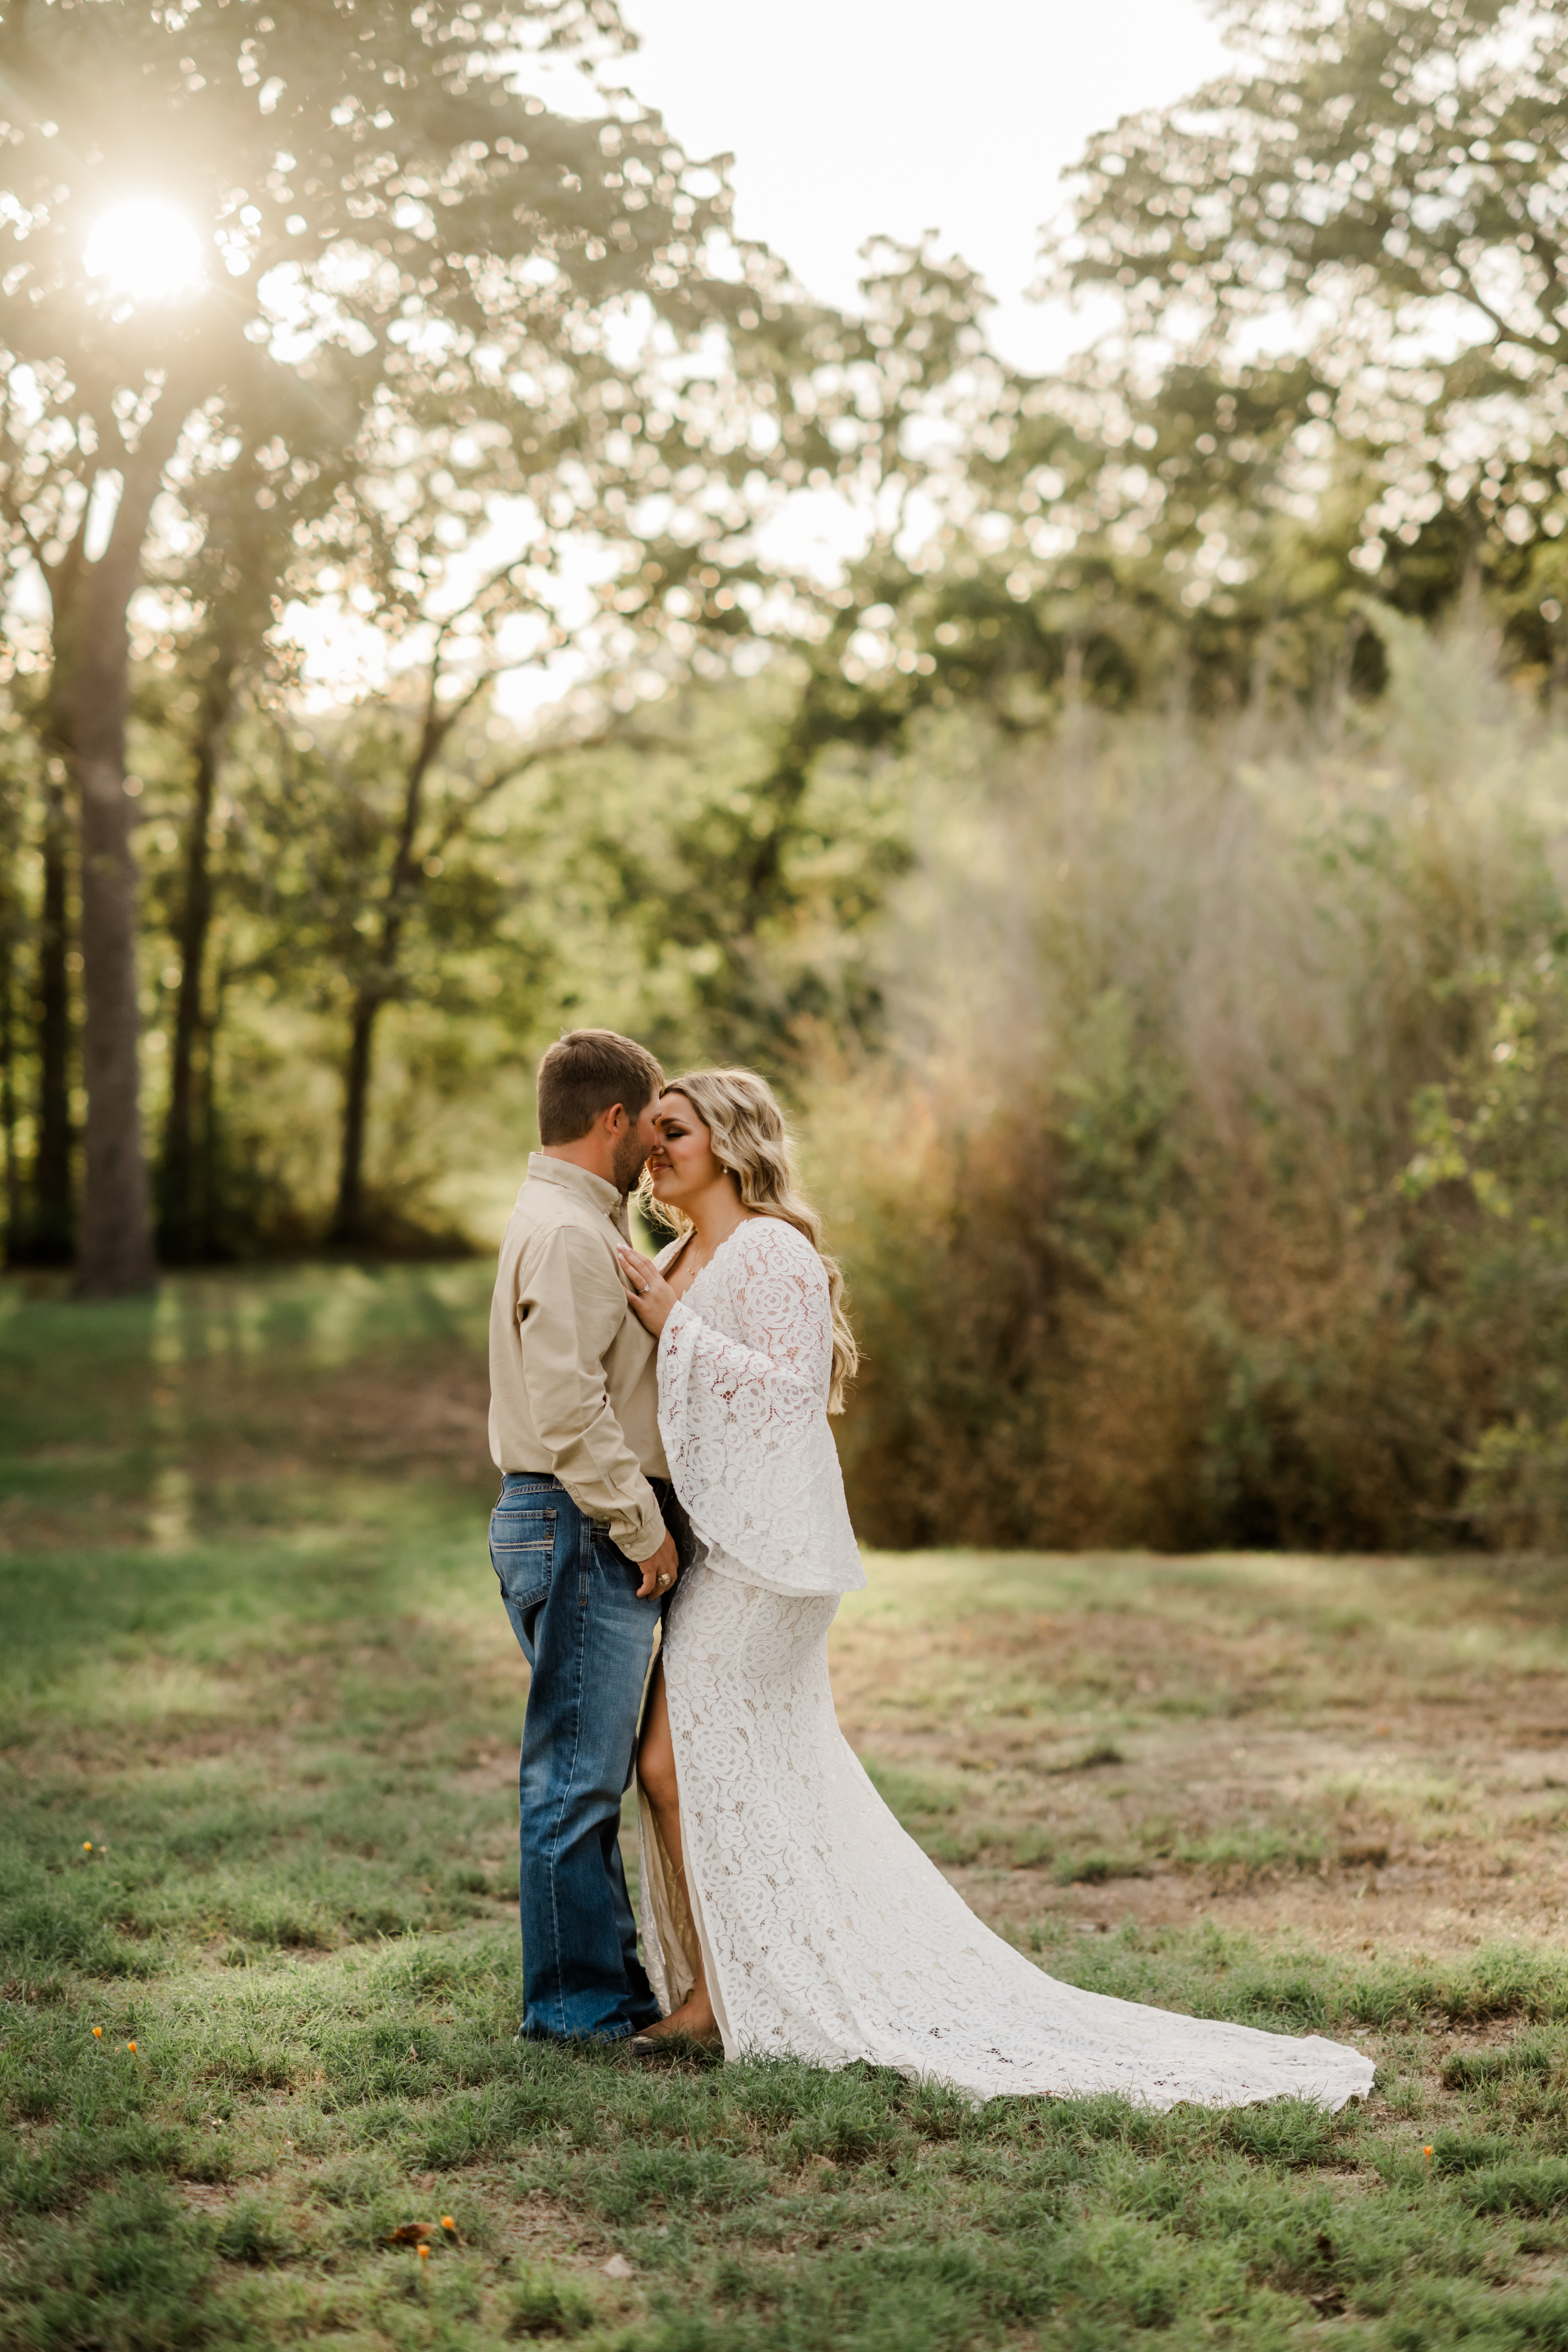 Paityn and Drew’s Engagement at Hensel Park in College Station, Texas with Rachel Driskell Photography